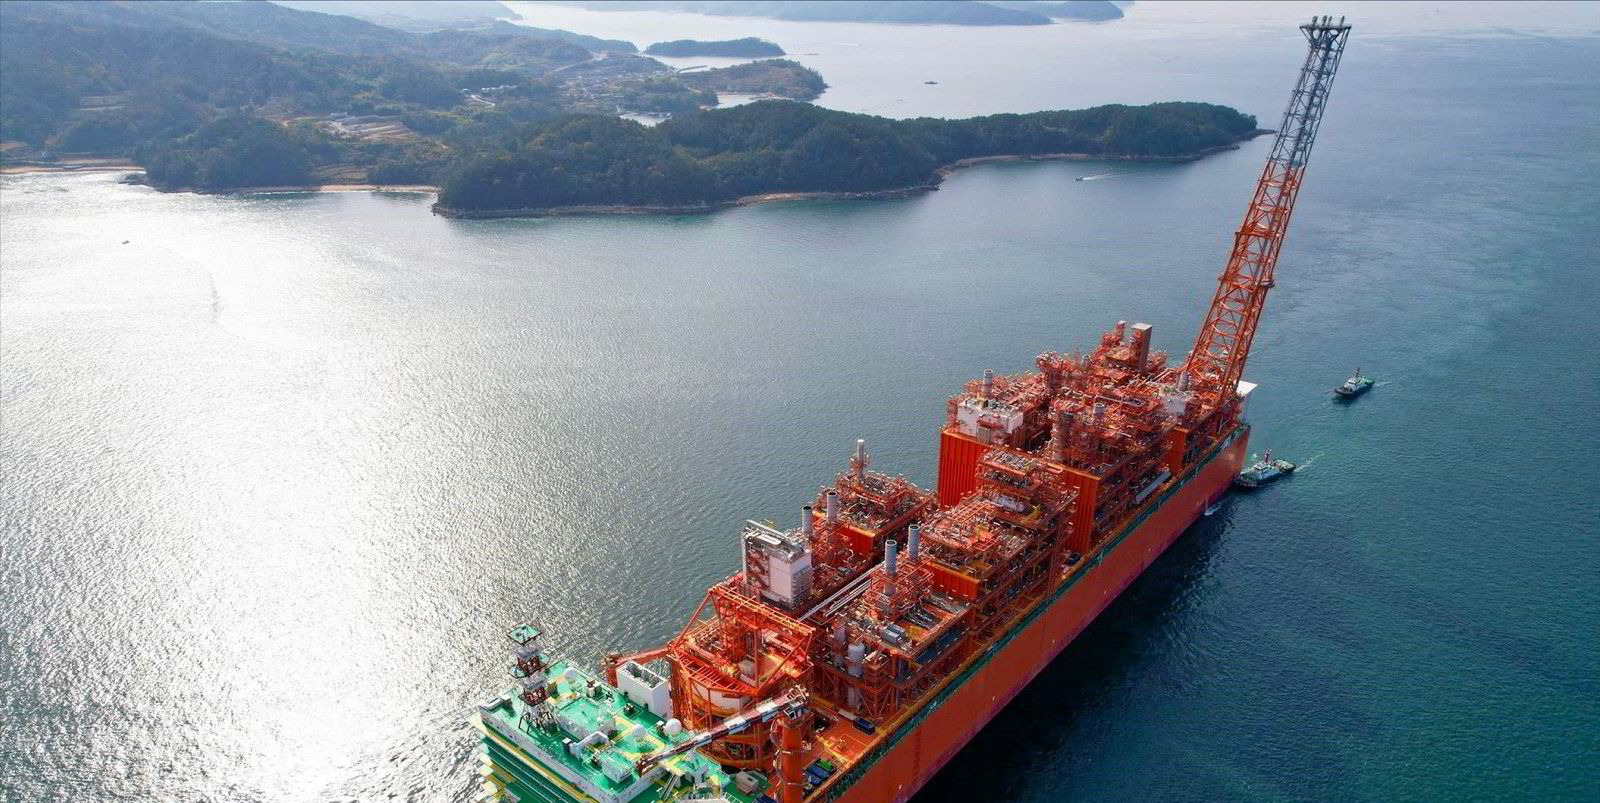 Mozambique’s first LNG cargo shipment has yet to arrive.